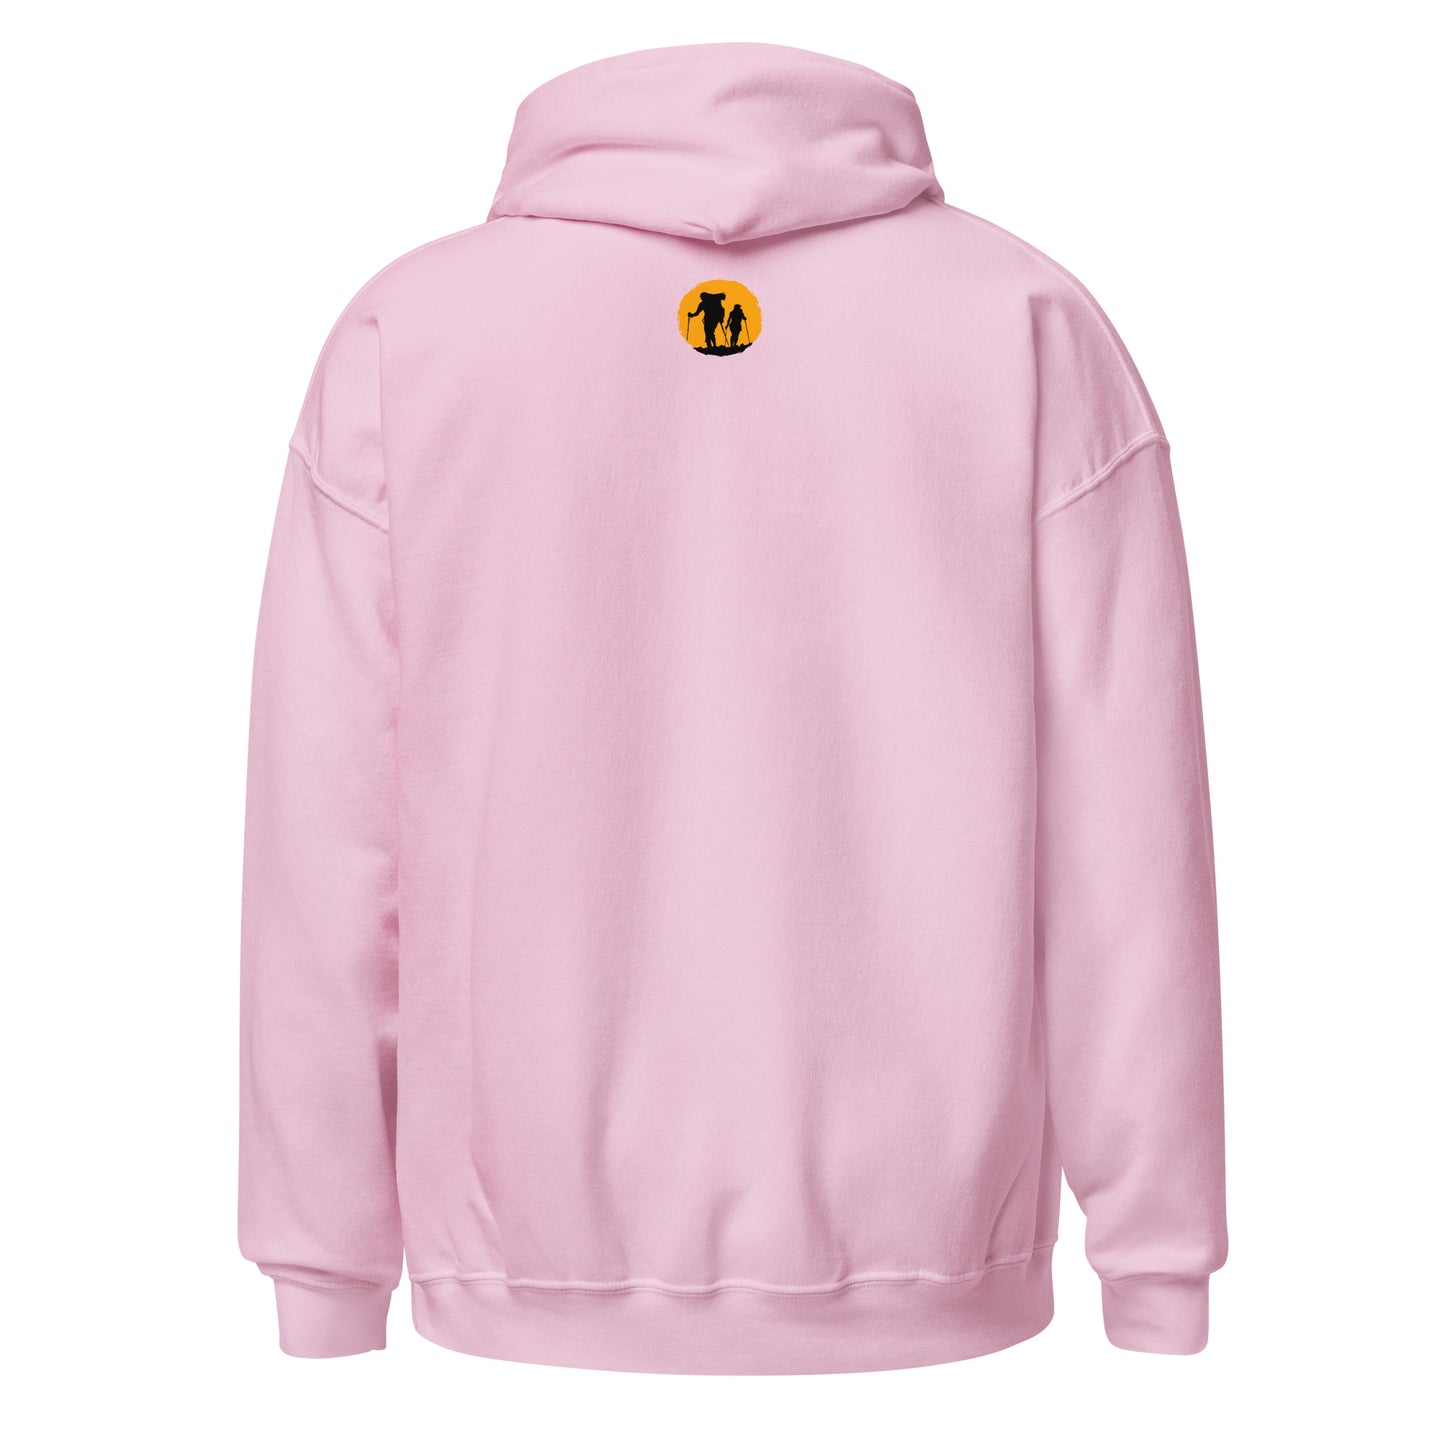 Cirque of the Towers Hoodie